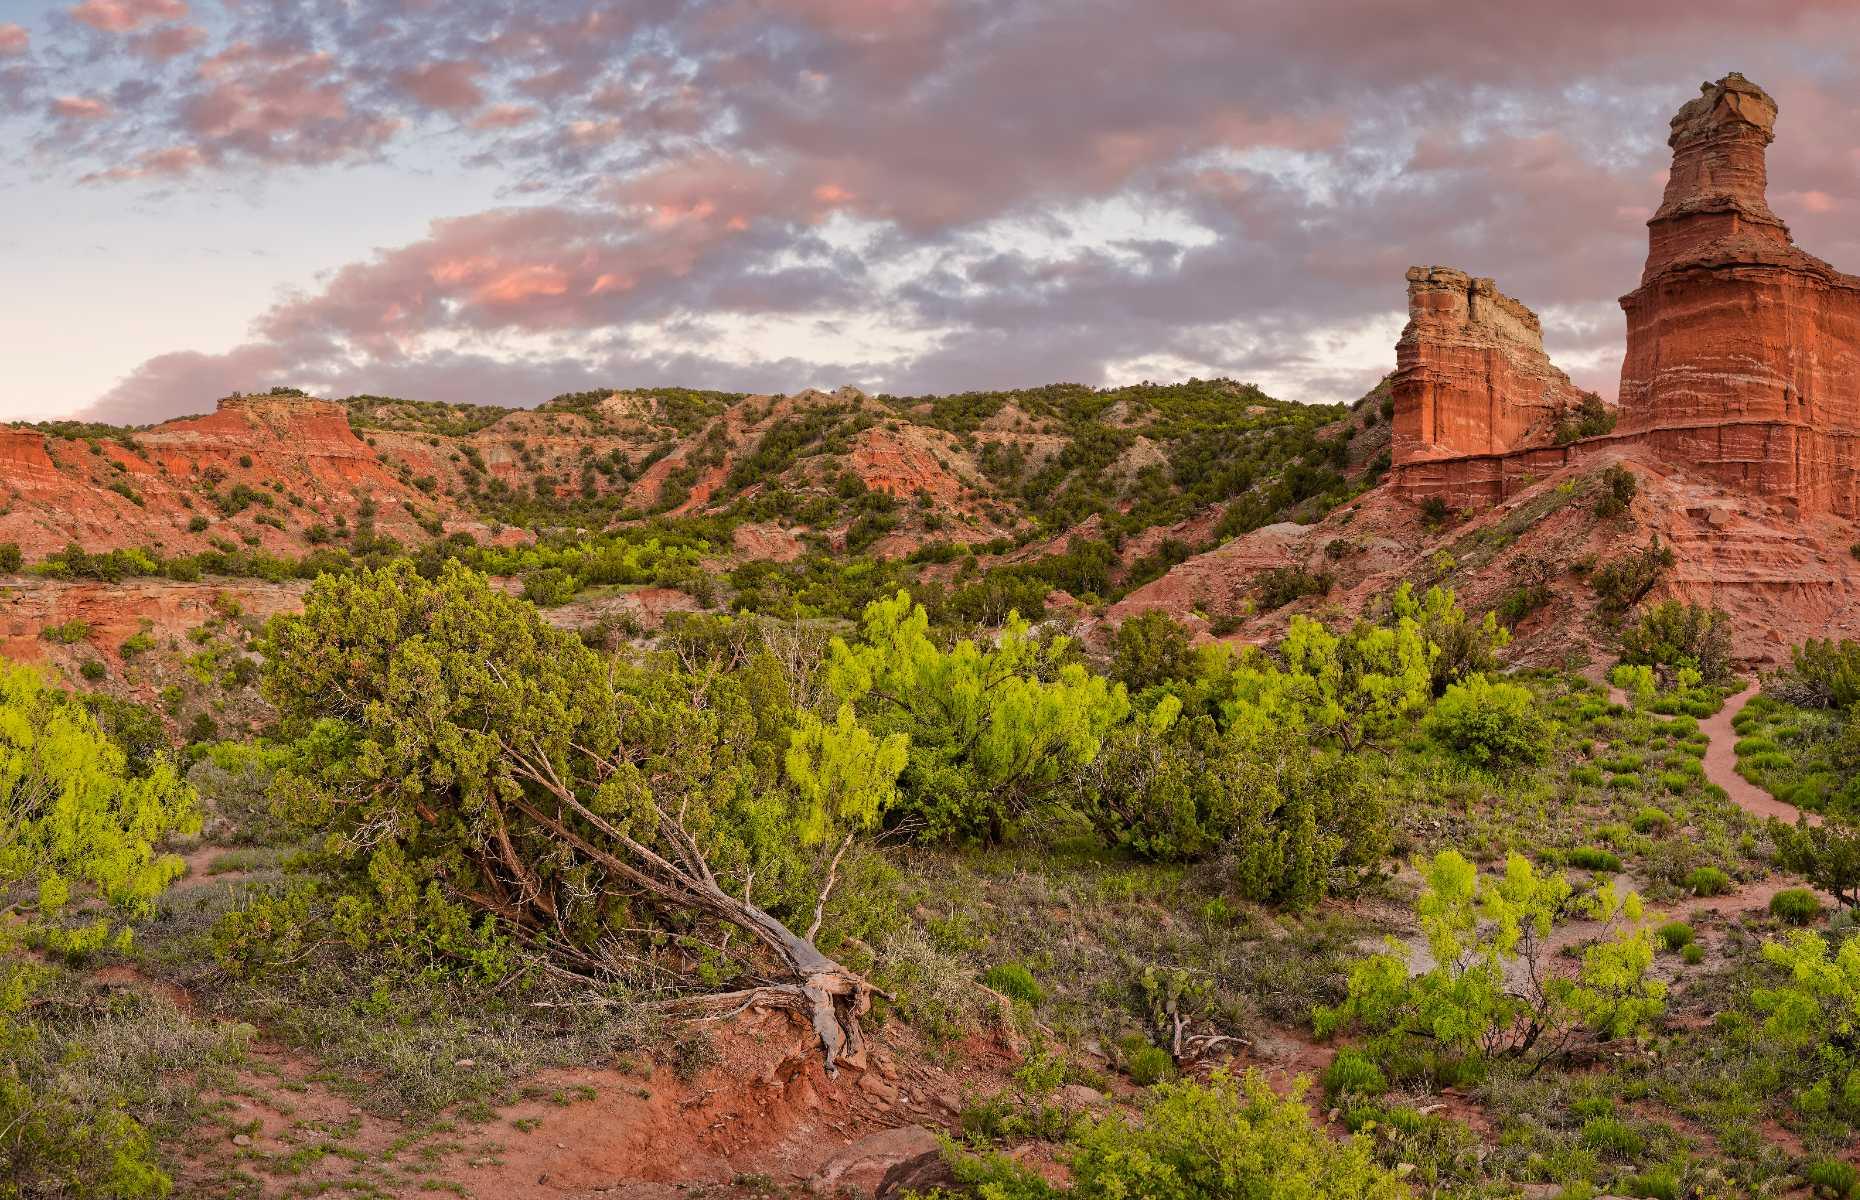 <p>Nicknamed ‘The Grand Canyon of Texas,’ Palo Duro is located in the state’s north. The landscape is full of drama – from striated canyon walls in earthy shades of red, purple and brown, to flora that entices with color, while simultaneously issuing spiky warnings to curious fingers. Activities include horseback riding, zip lining, camping and biking – plus, of course, keeping your eyes peeled for roadrunners and rattlesnakes. A six-mile trail takes you to Lighthouse Rock, an impressive red rock monolith standing at 310 feet.</p>